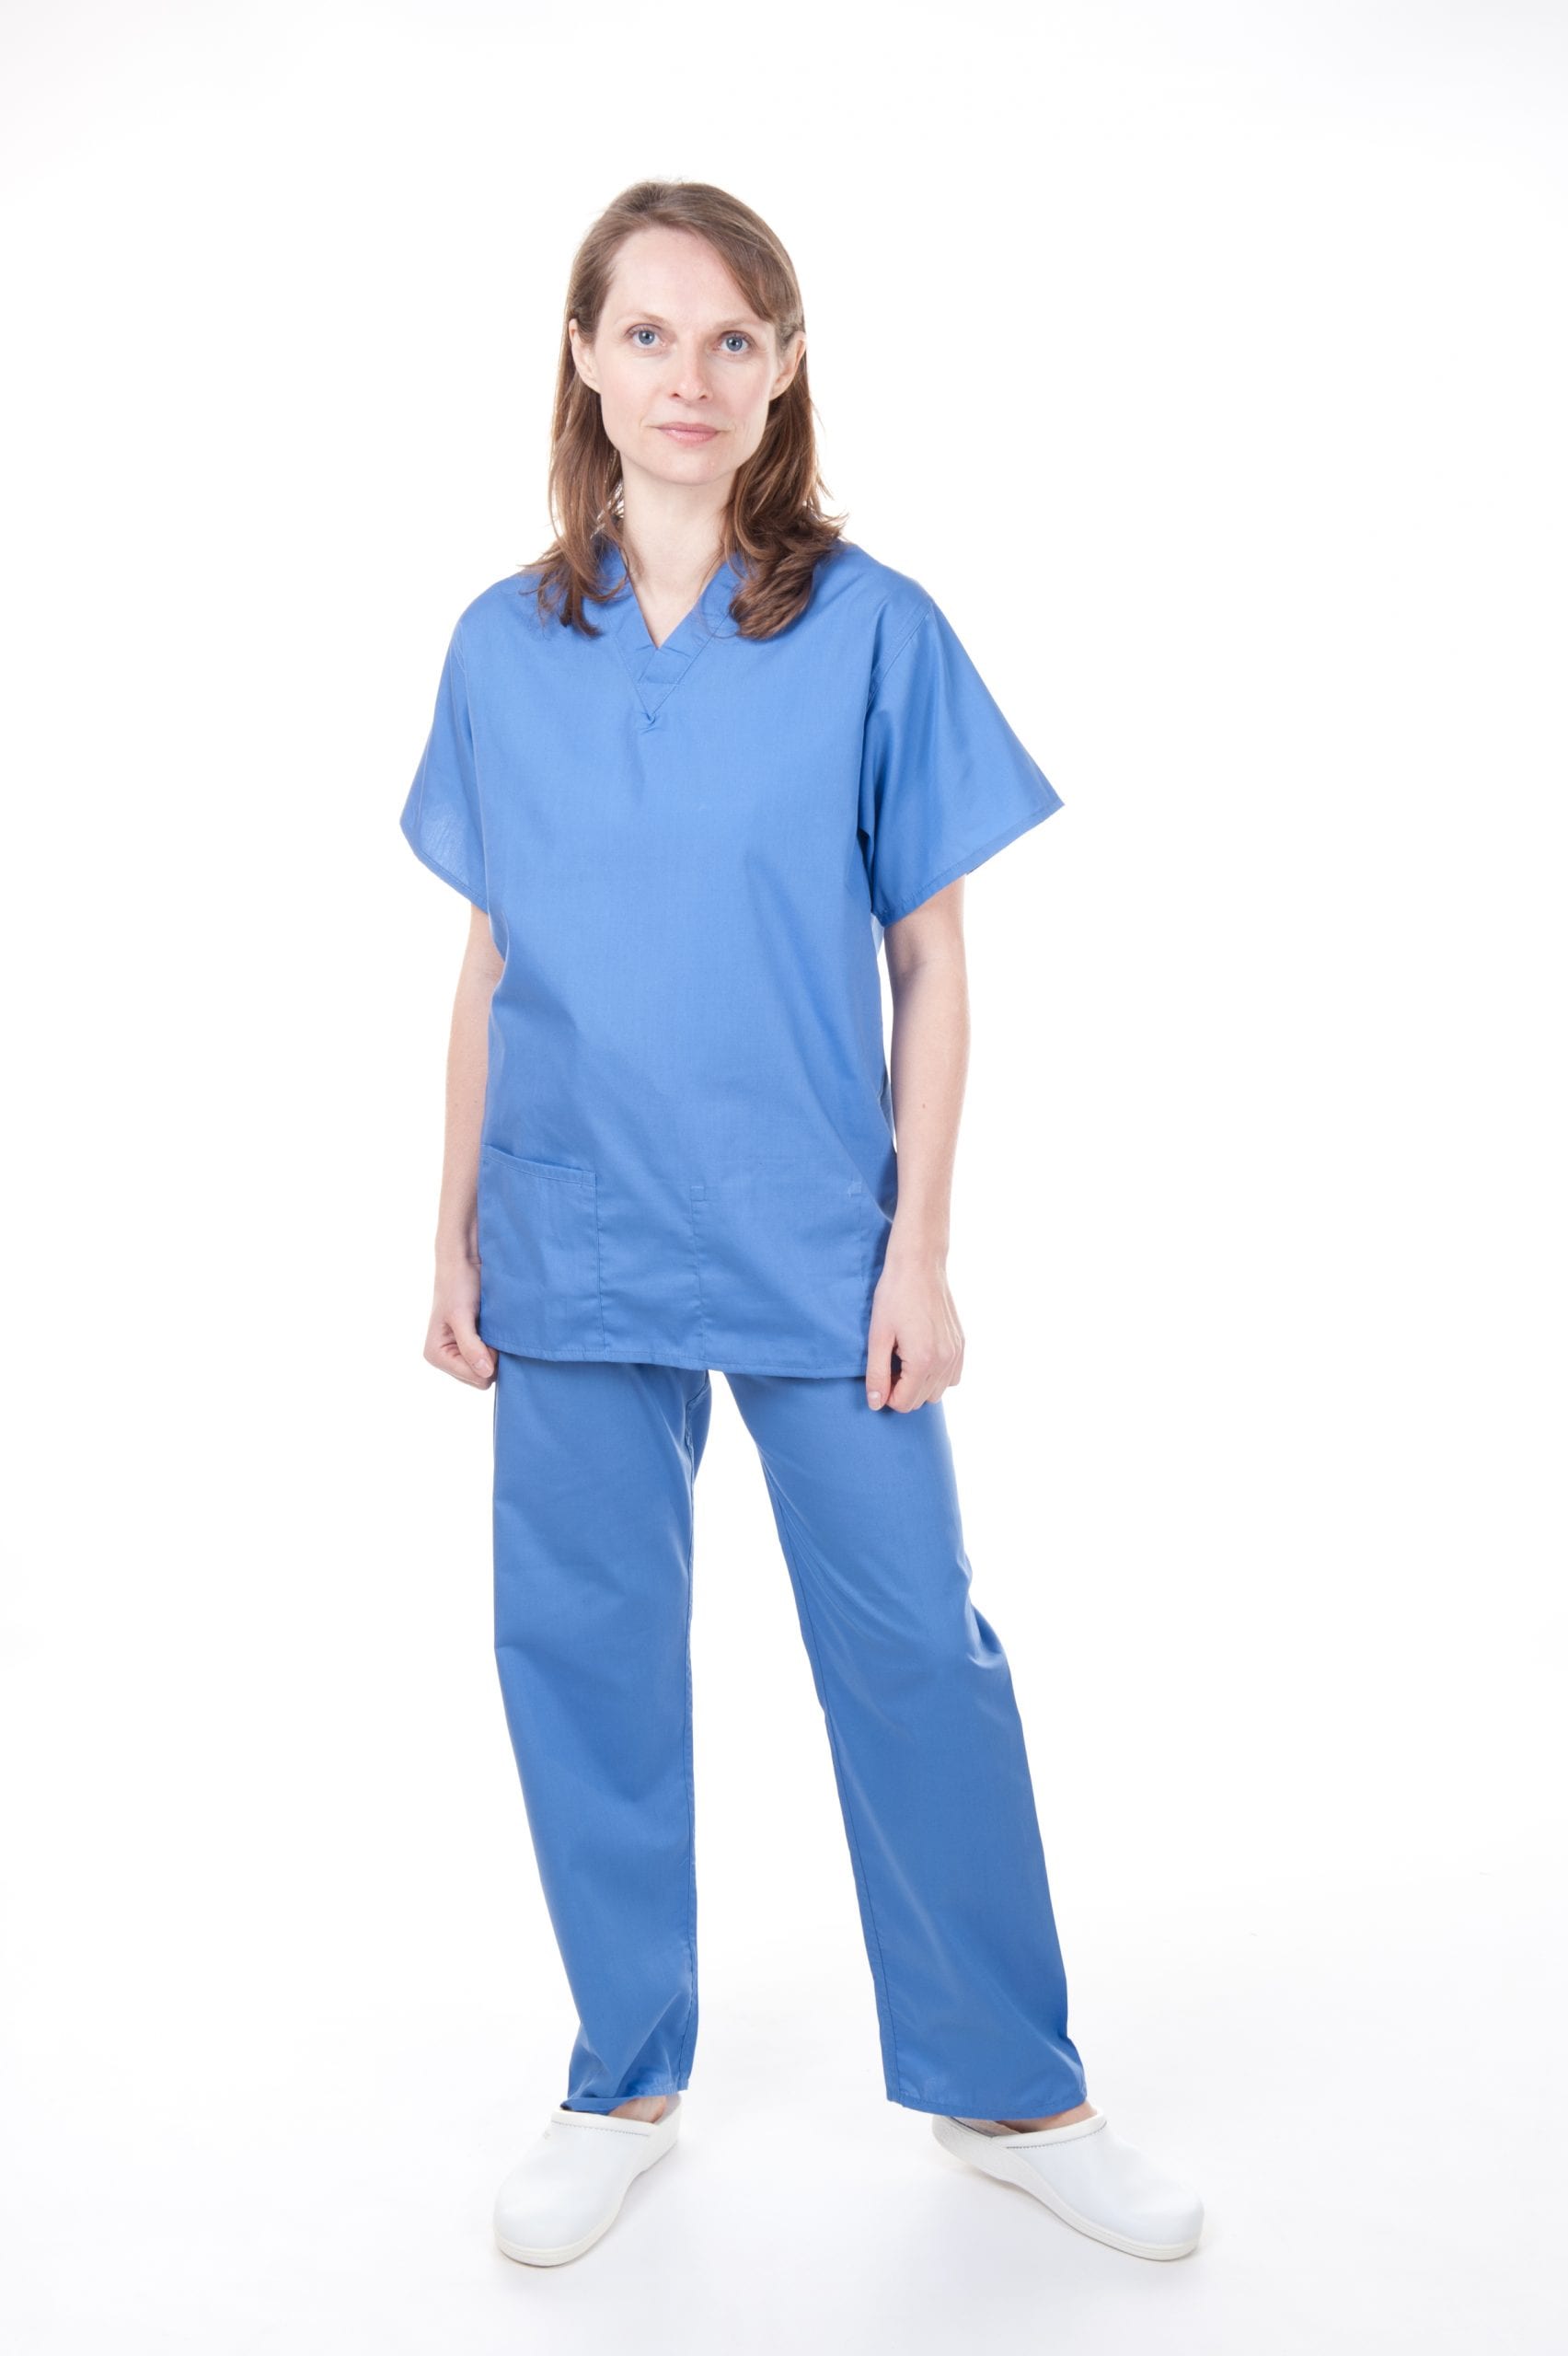 The importance of medical uniforms in the UK  AWB Textiles